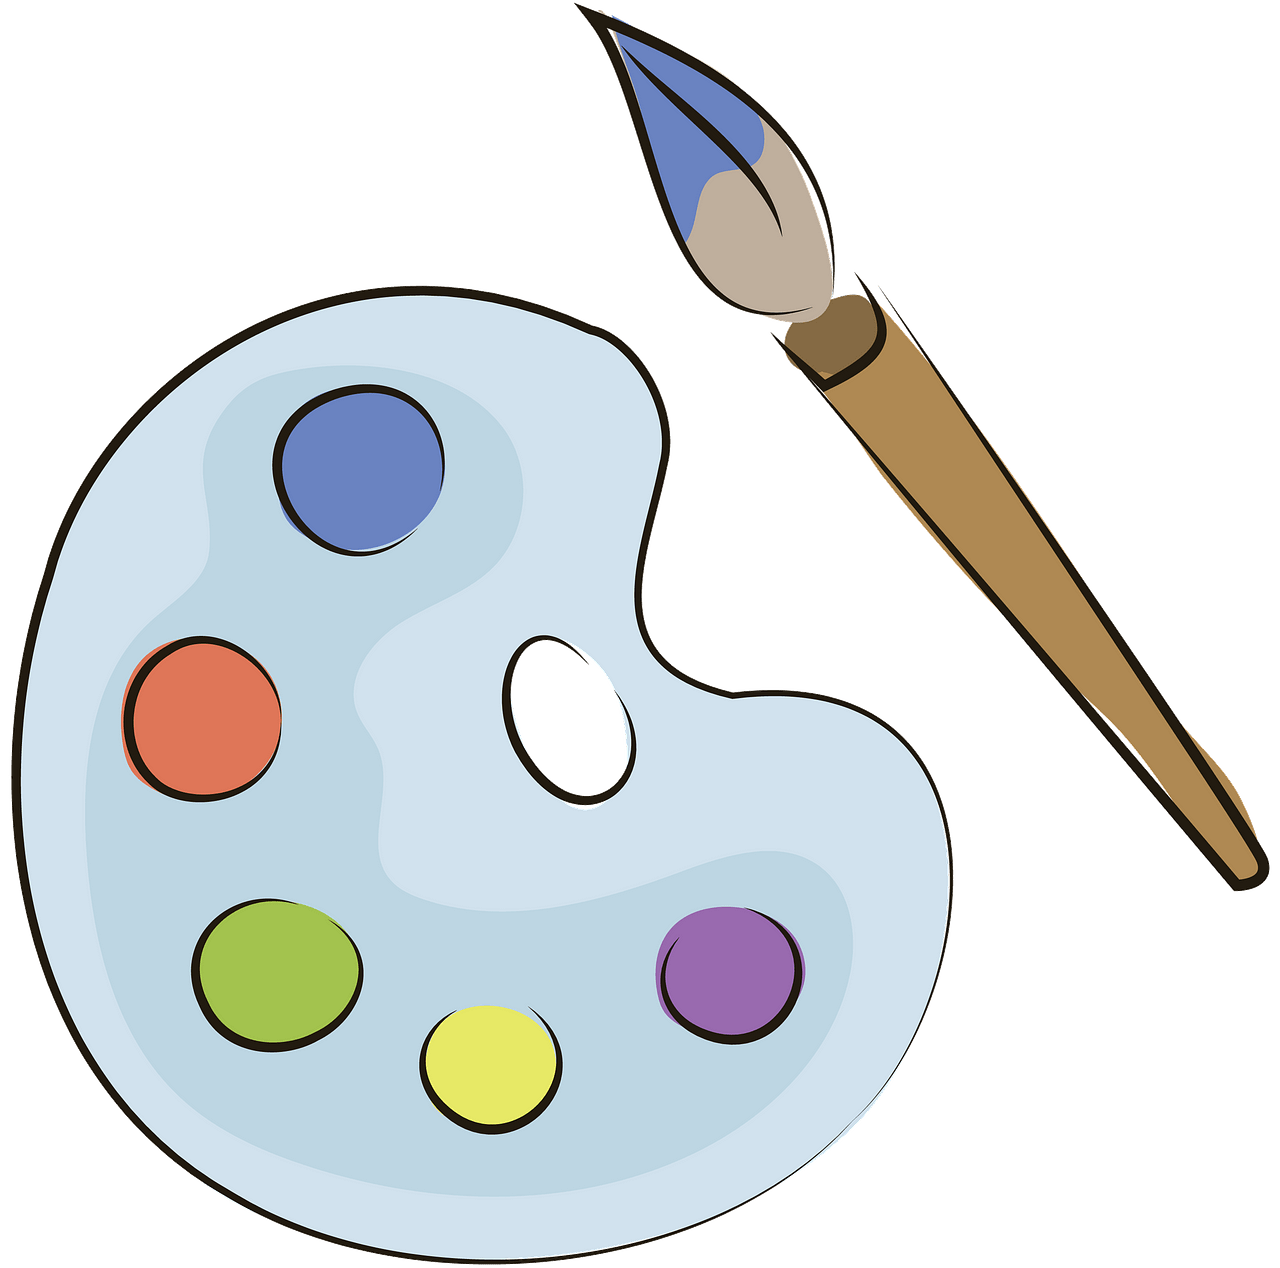 Painter Palette and Brush clipart. Free download..